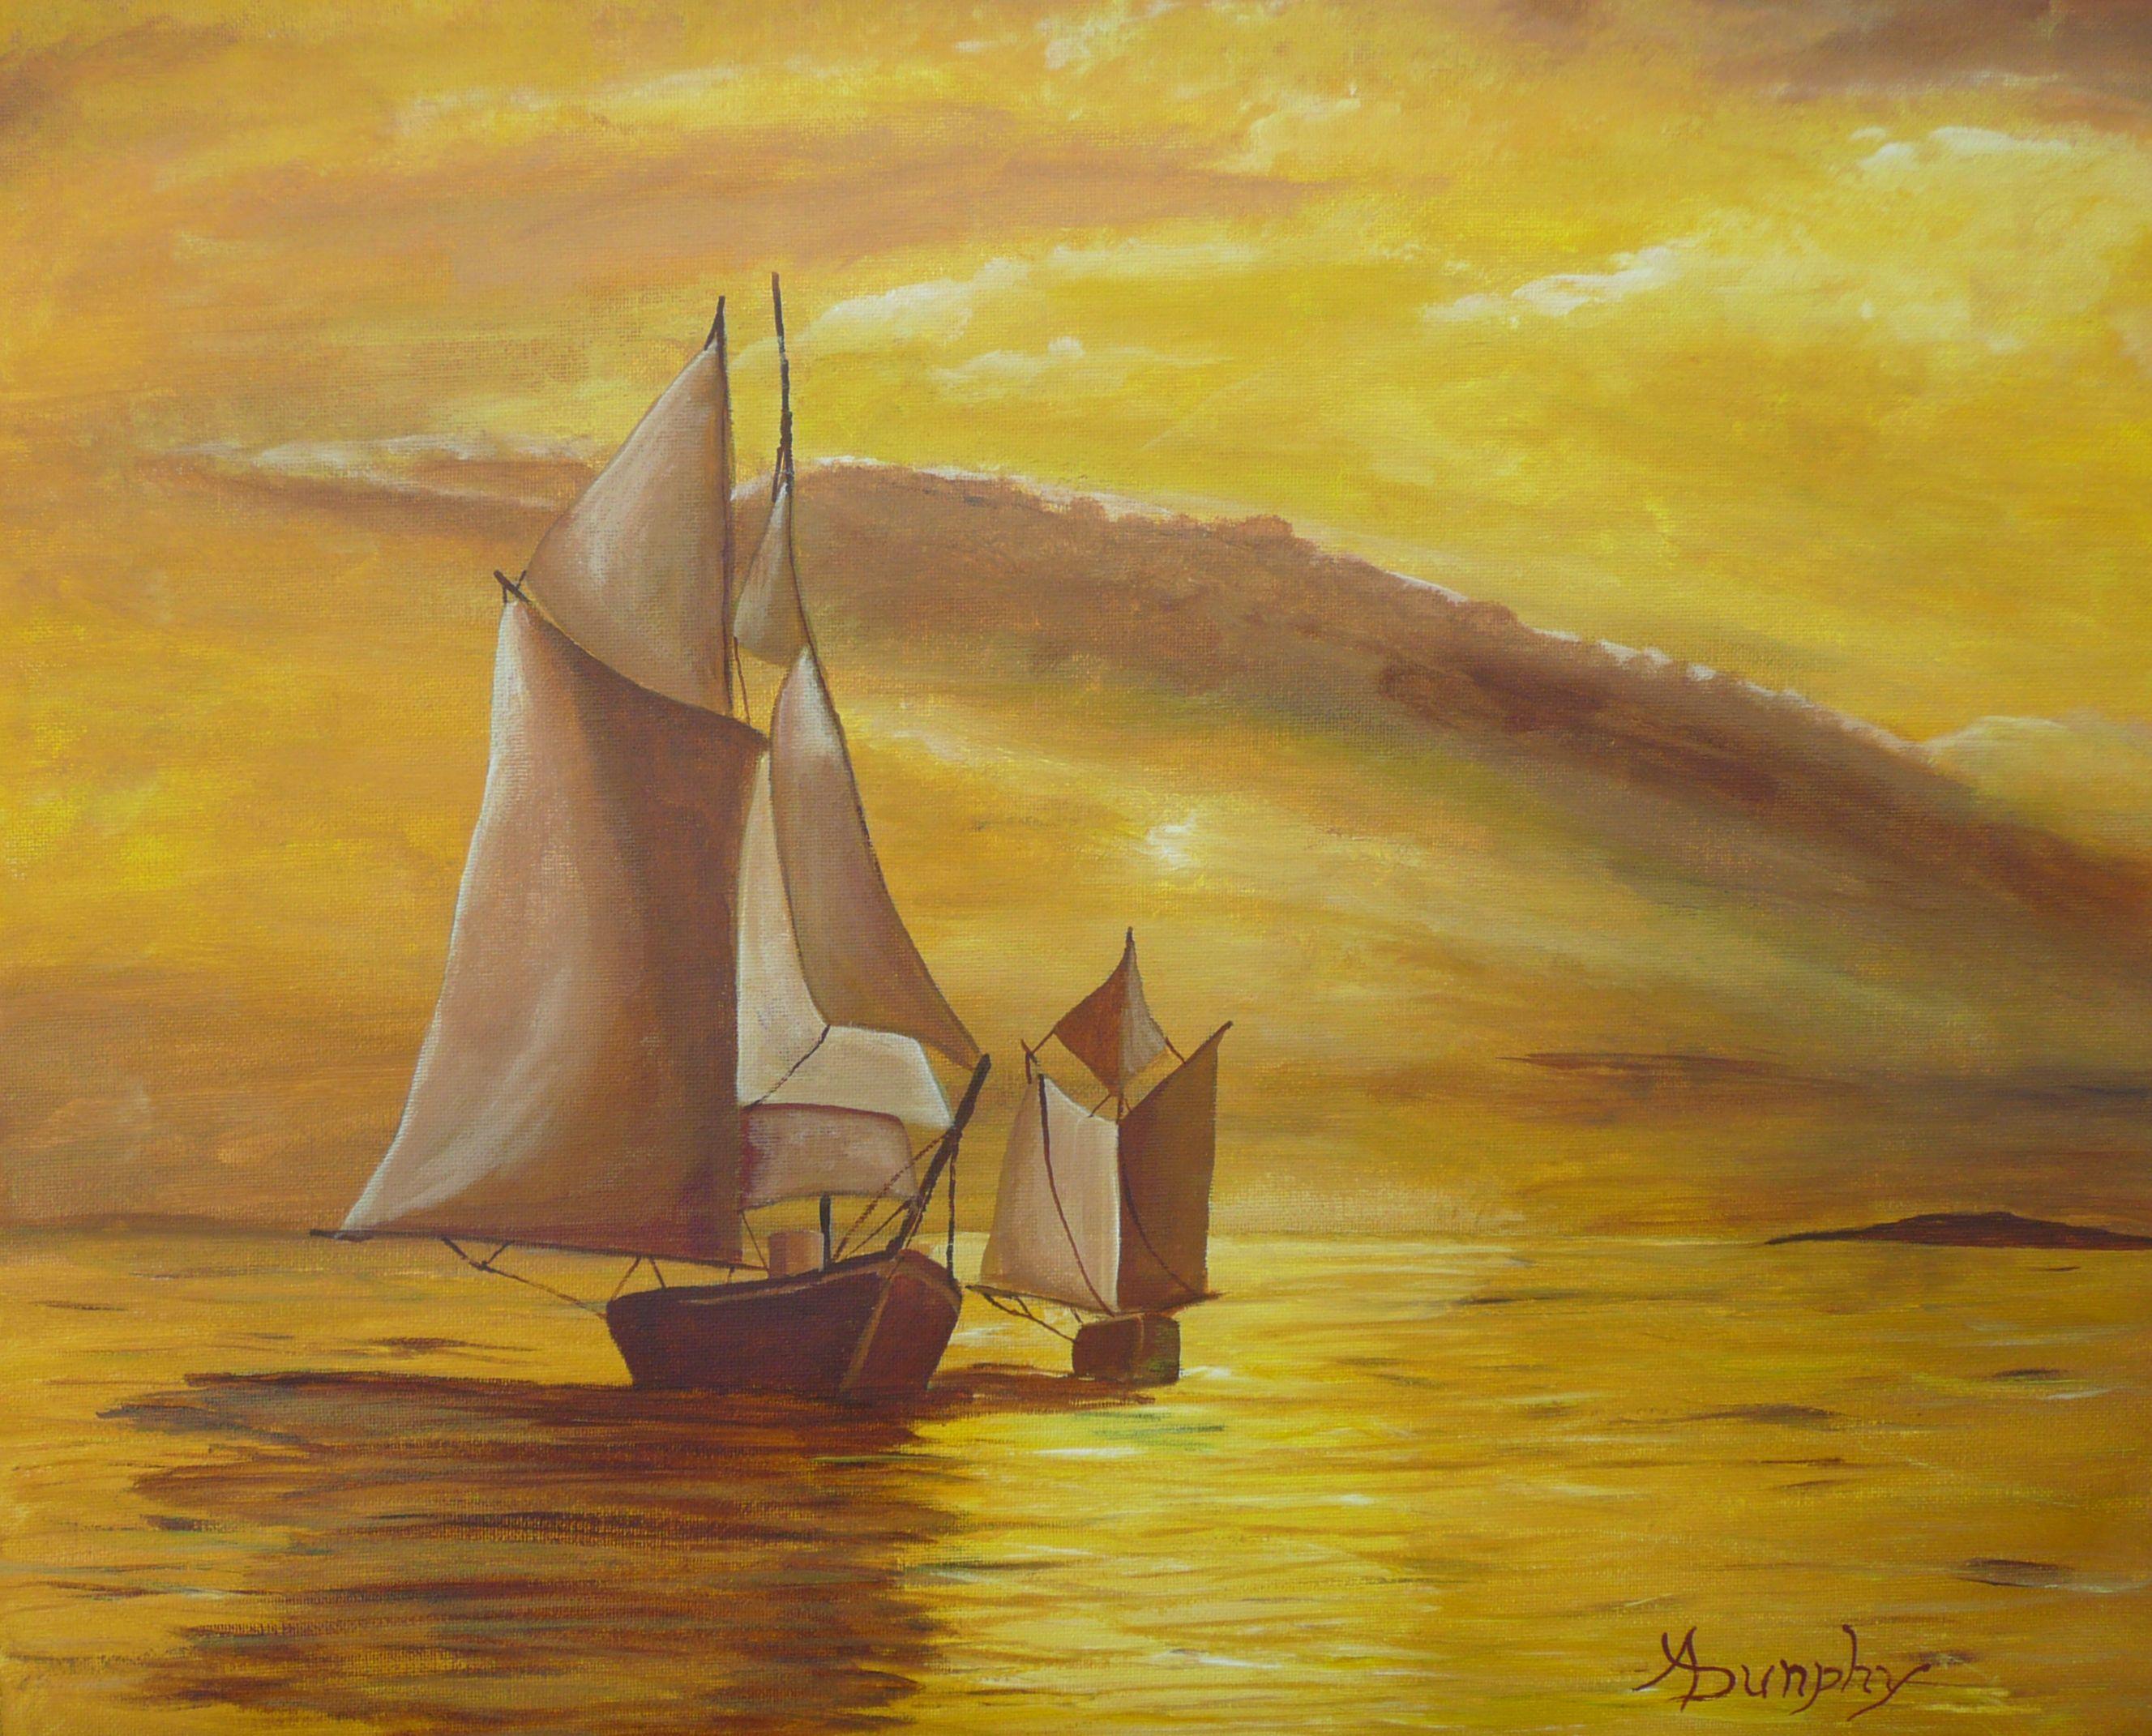 I have been studying the techniques employed by William Turner to create his iconic impressionism pieces. In this work I have placed two gaff-rigged vessels at sea during the rise of the morning sun. This piece has been created using professional